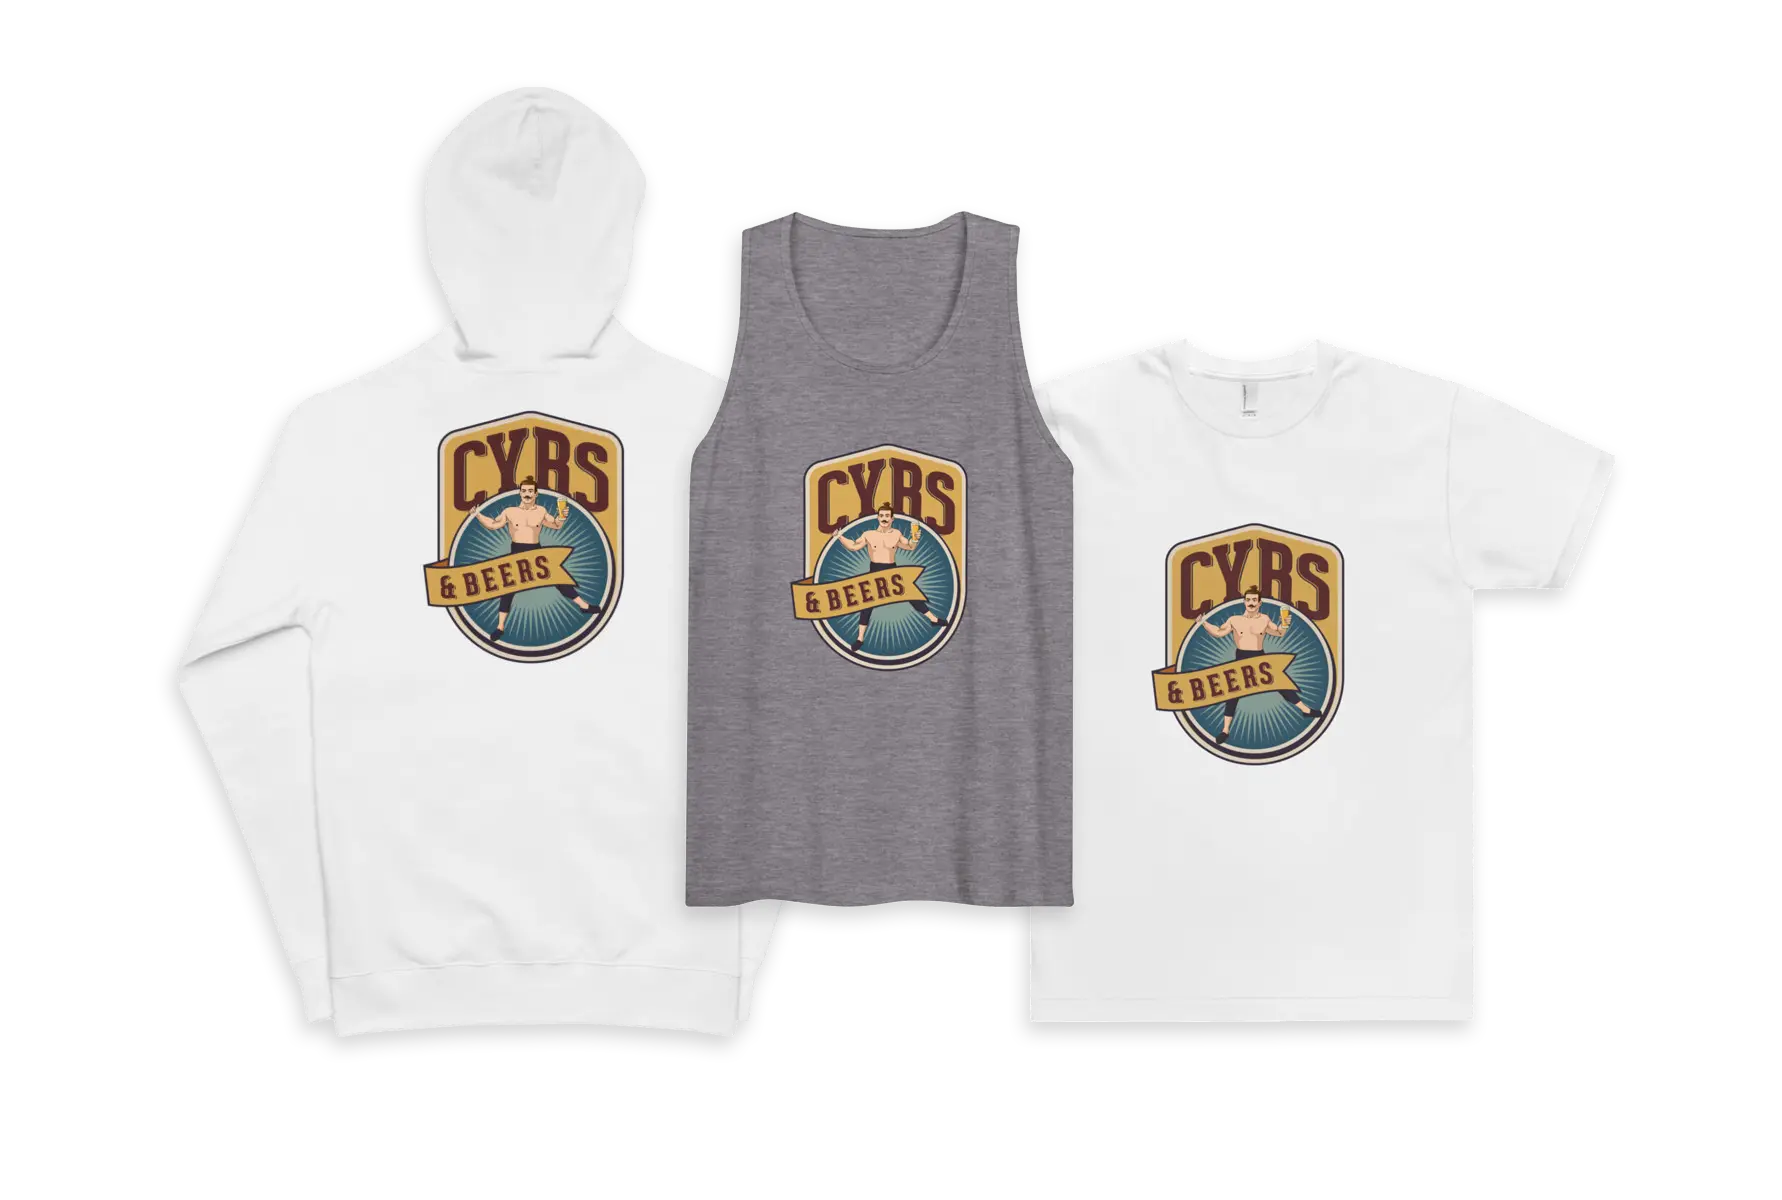 sweatshirt, tank top and t shirt with CYRS & BEERS logo